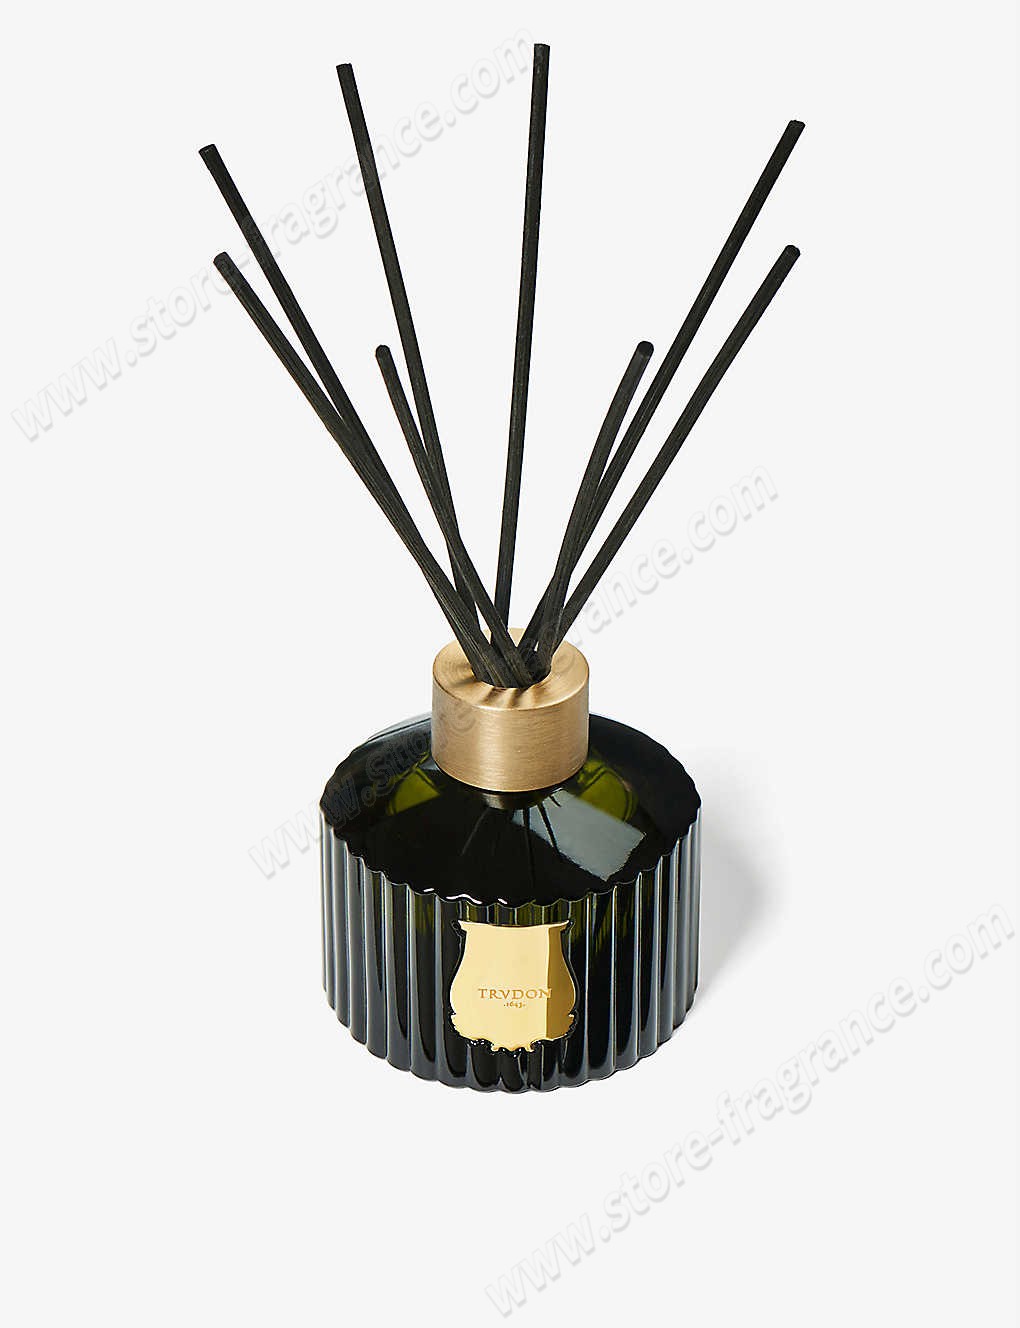 CIRE TRUDON/Cyrnos reed diffuser 350ml Limit Offer - -1